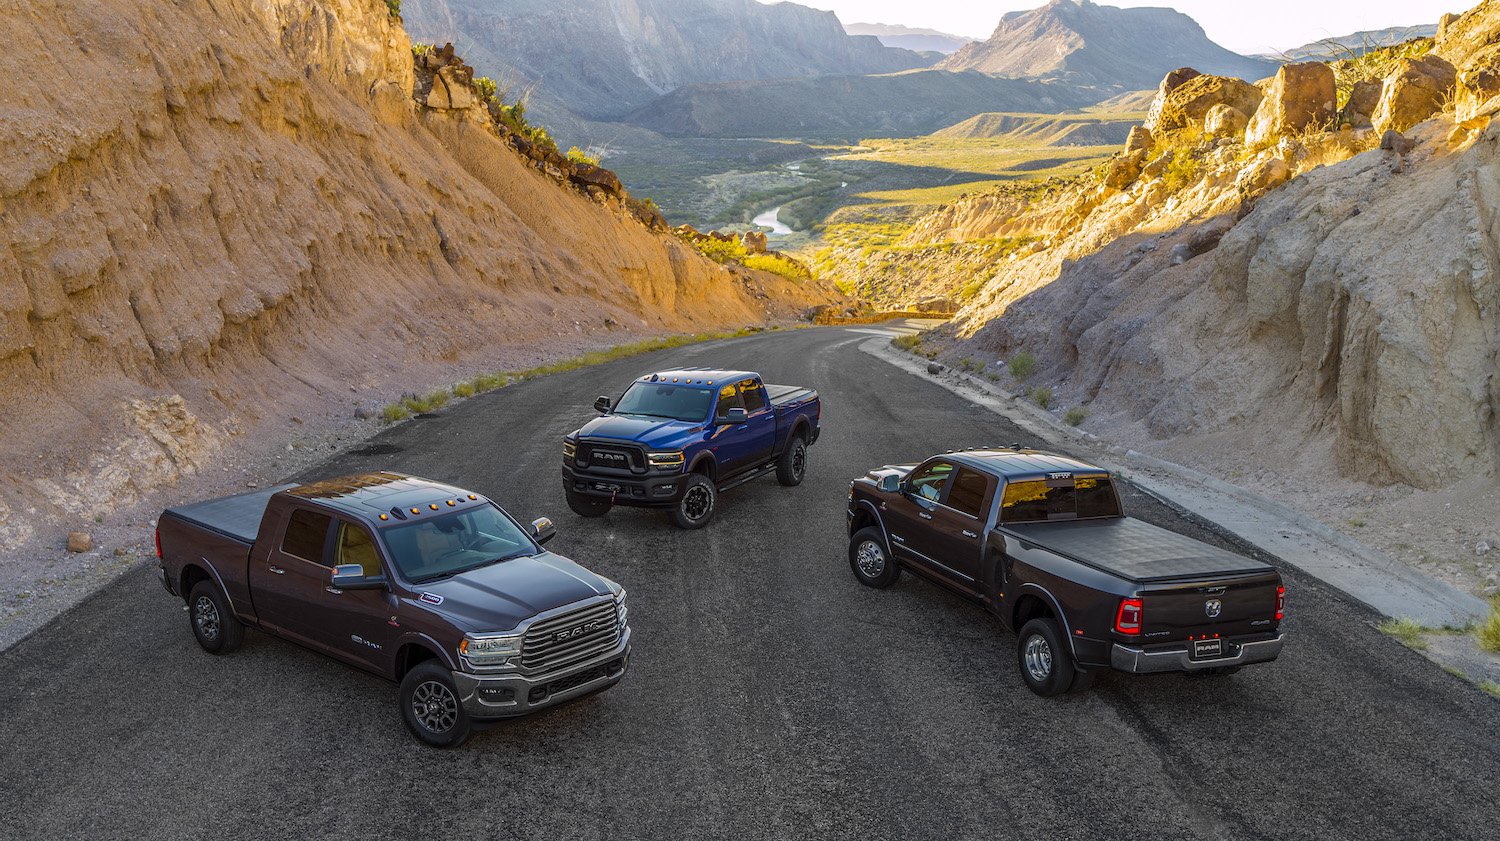 Three Ram pickup trucks parked in a mountain pass.